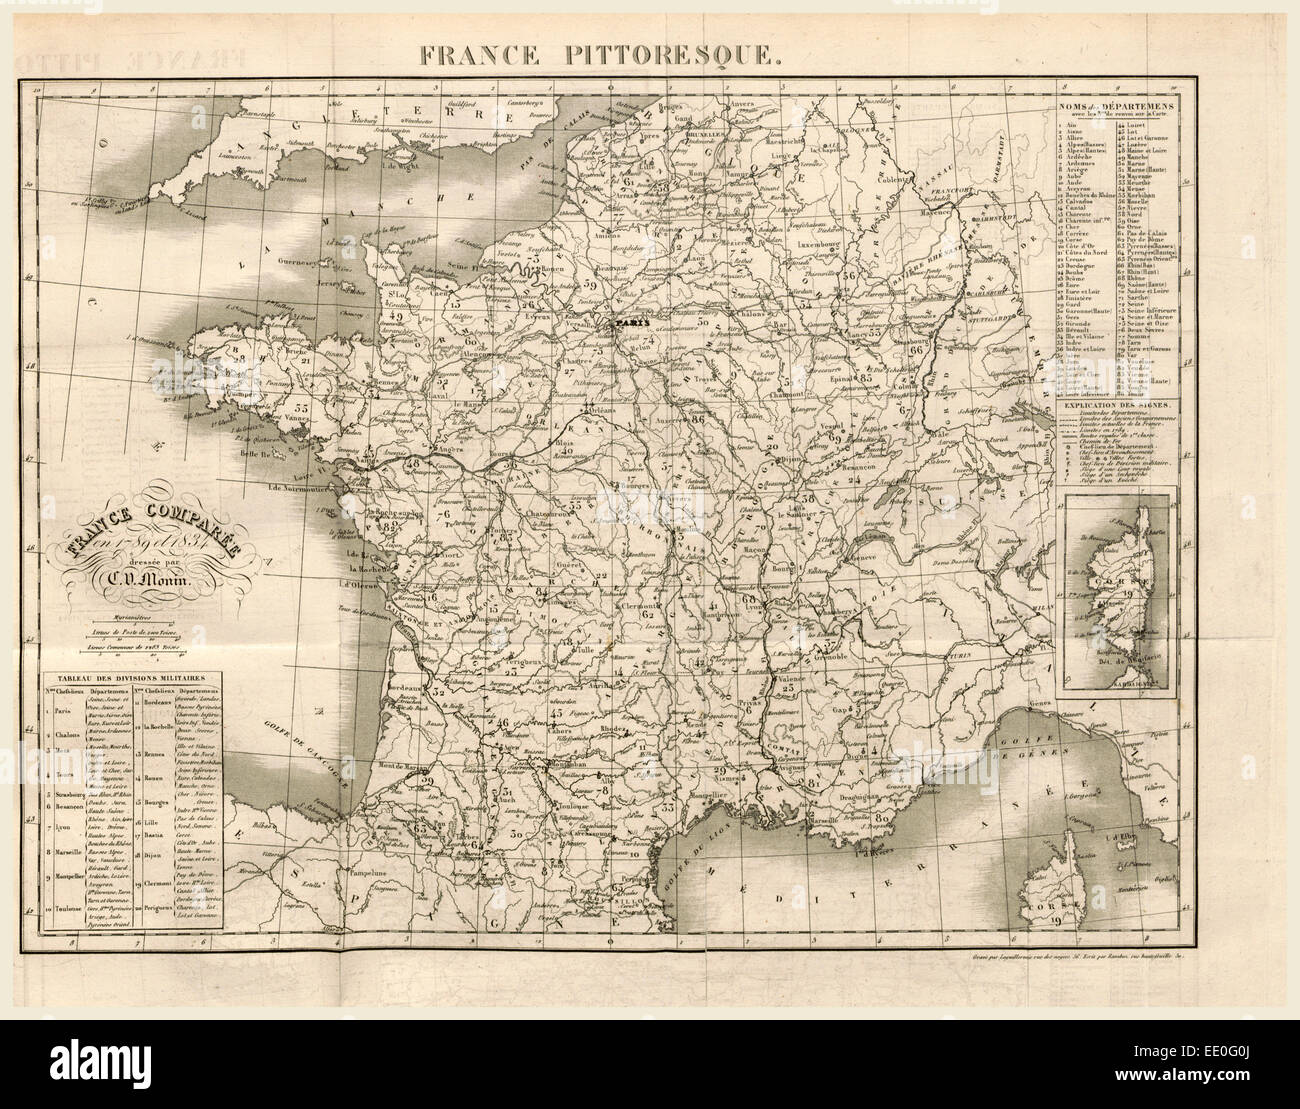 France pittoresque, map of France, 19th century engraving Stock Photo